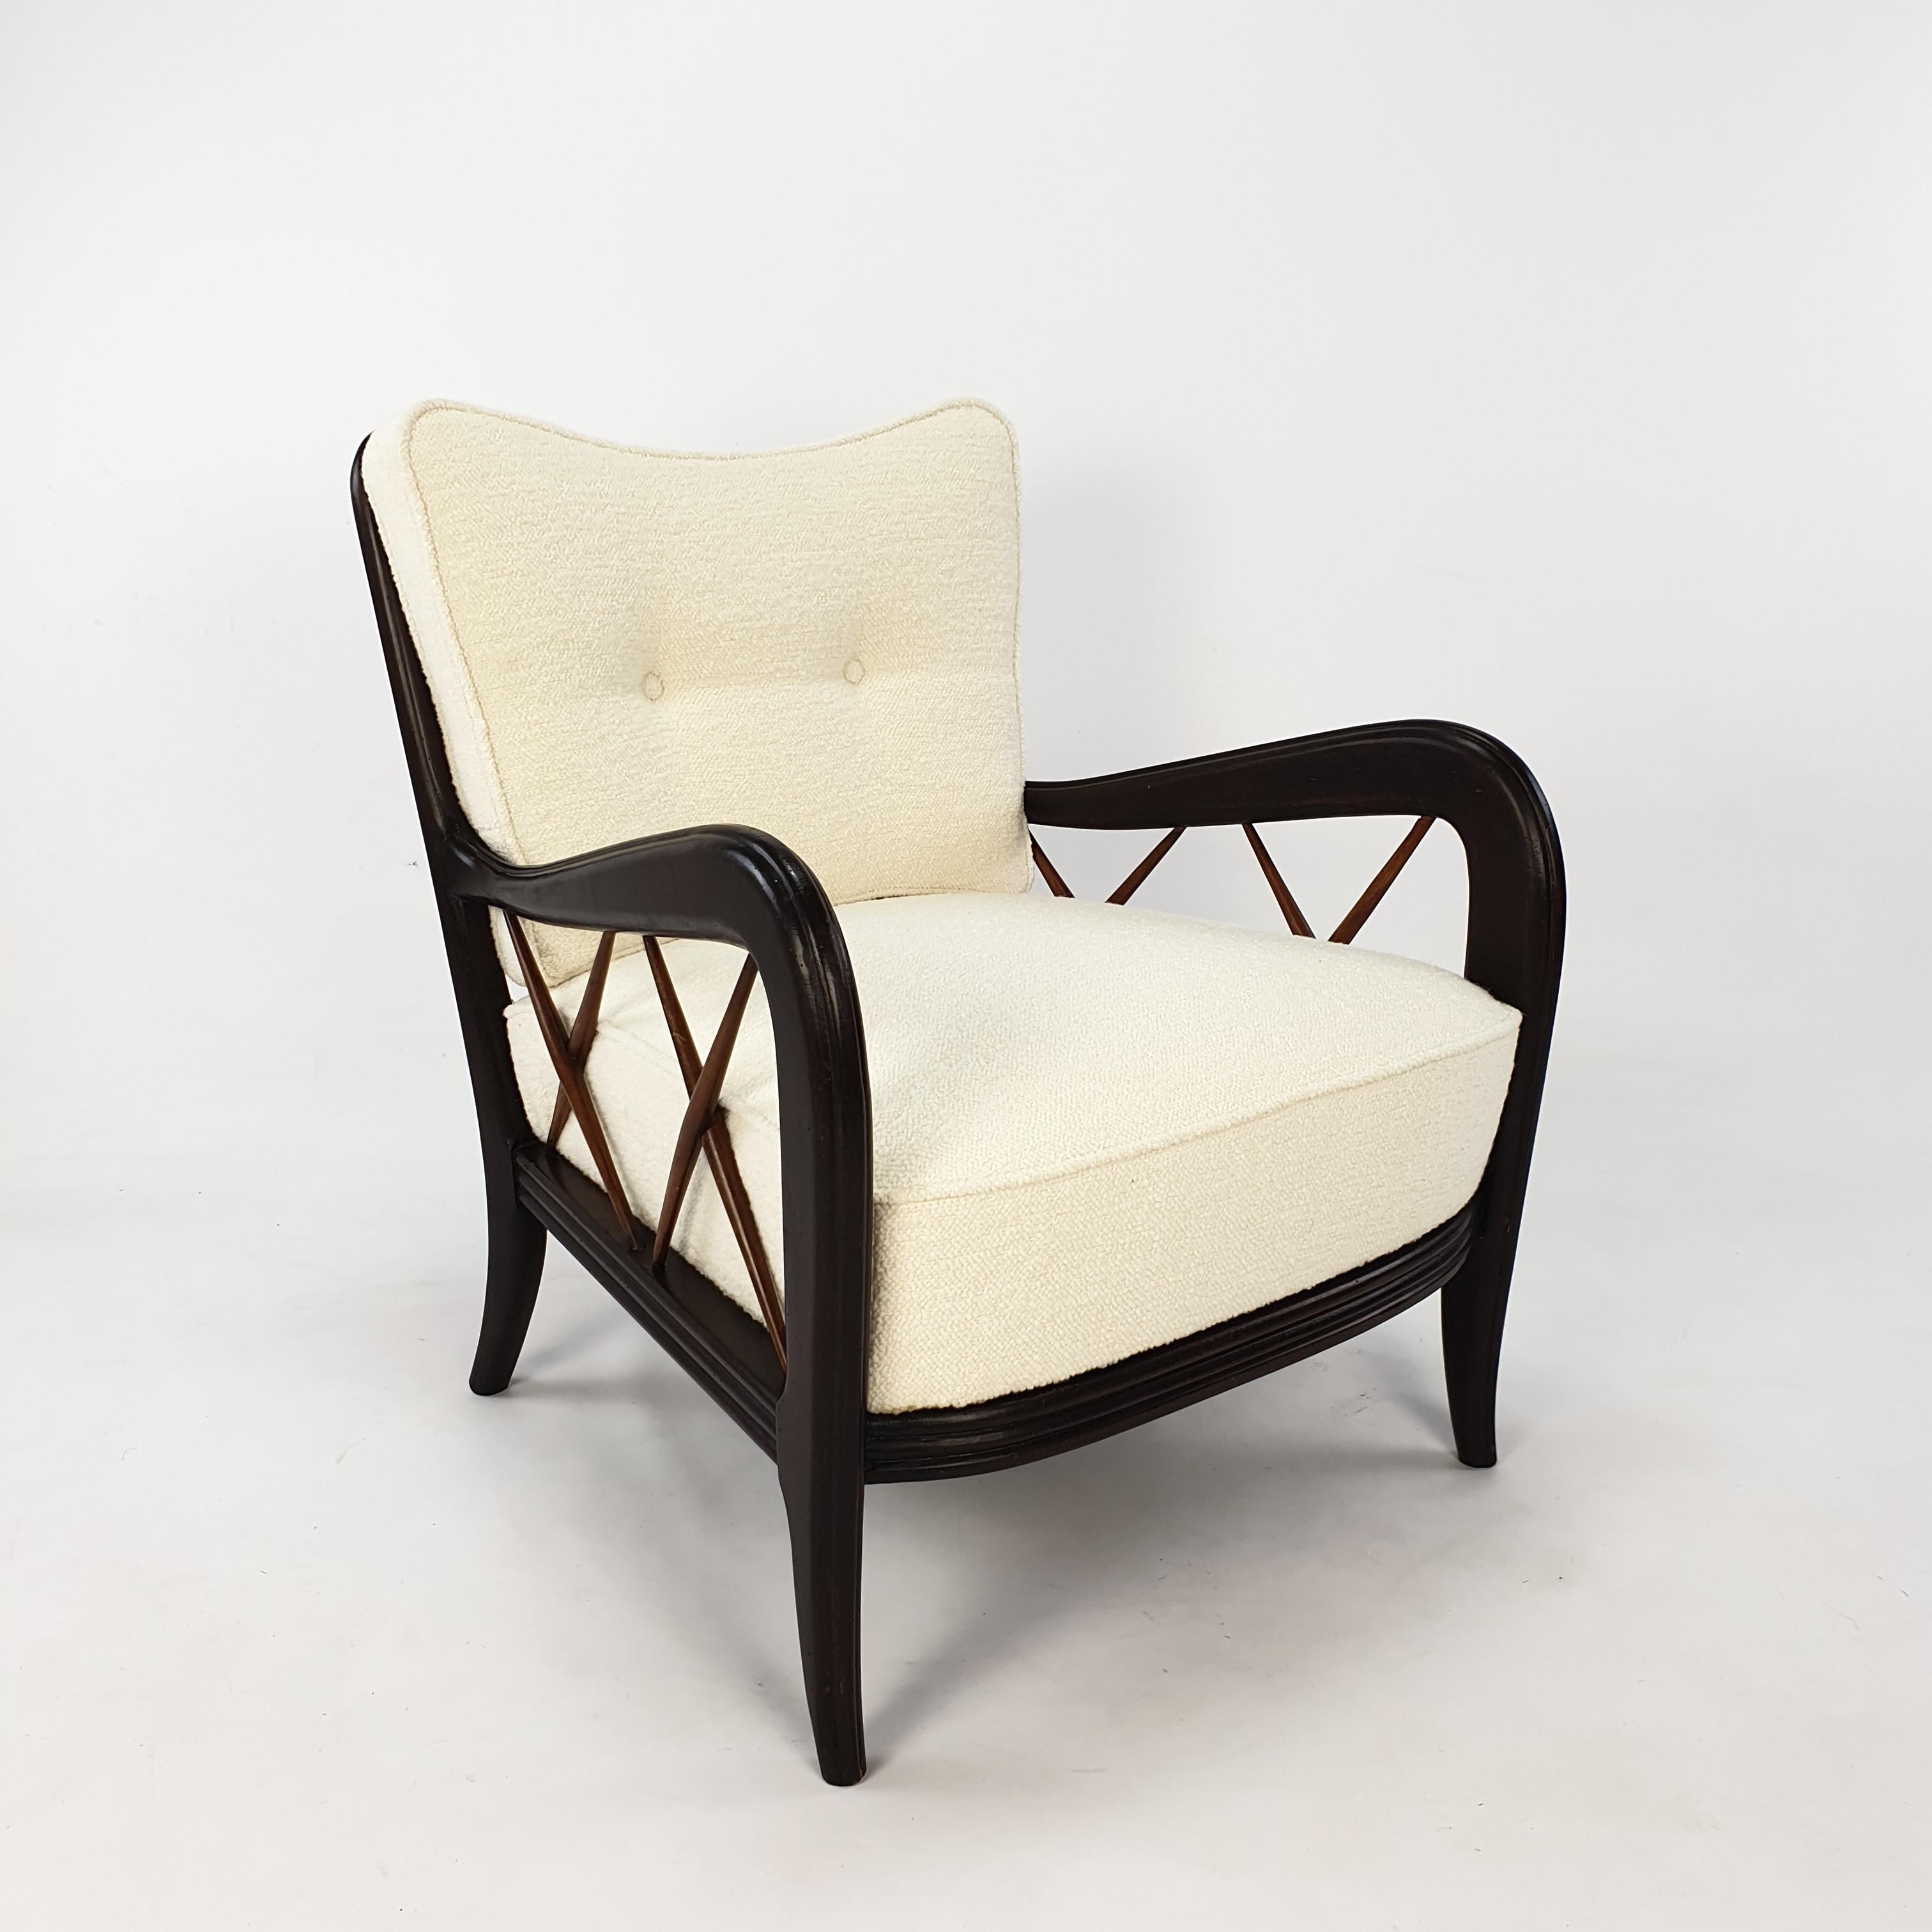 Stunning Italian armchair in the style of Paolo Buffa, 1950's.
This comfortable chair is made with magnificent craftsmanship regarding the very nice woodwork with elegant shapes.
It is completely restored with new cushions and it is just